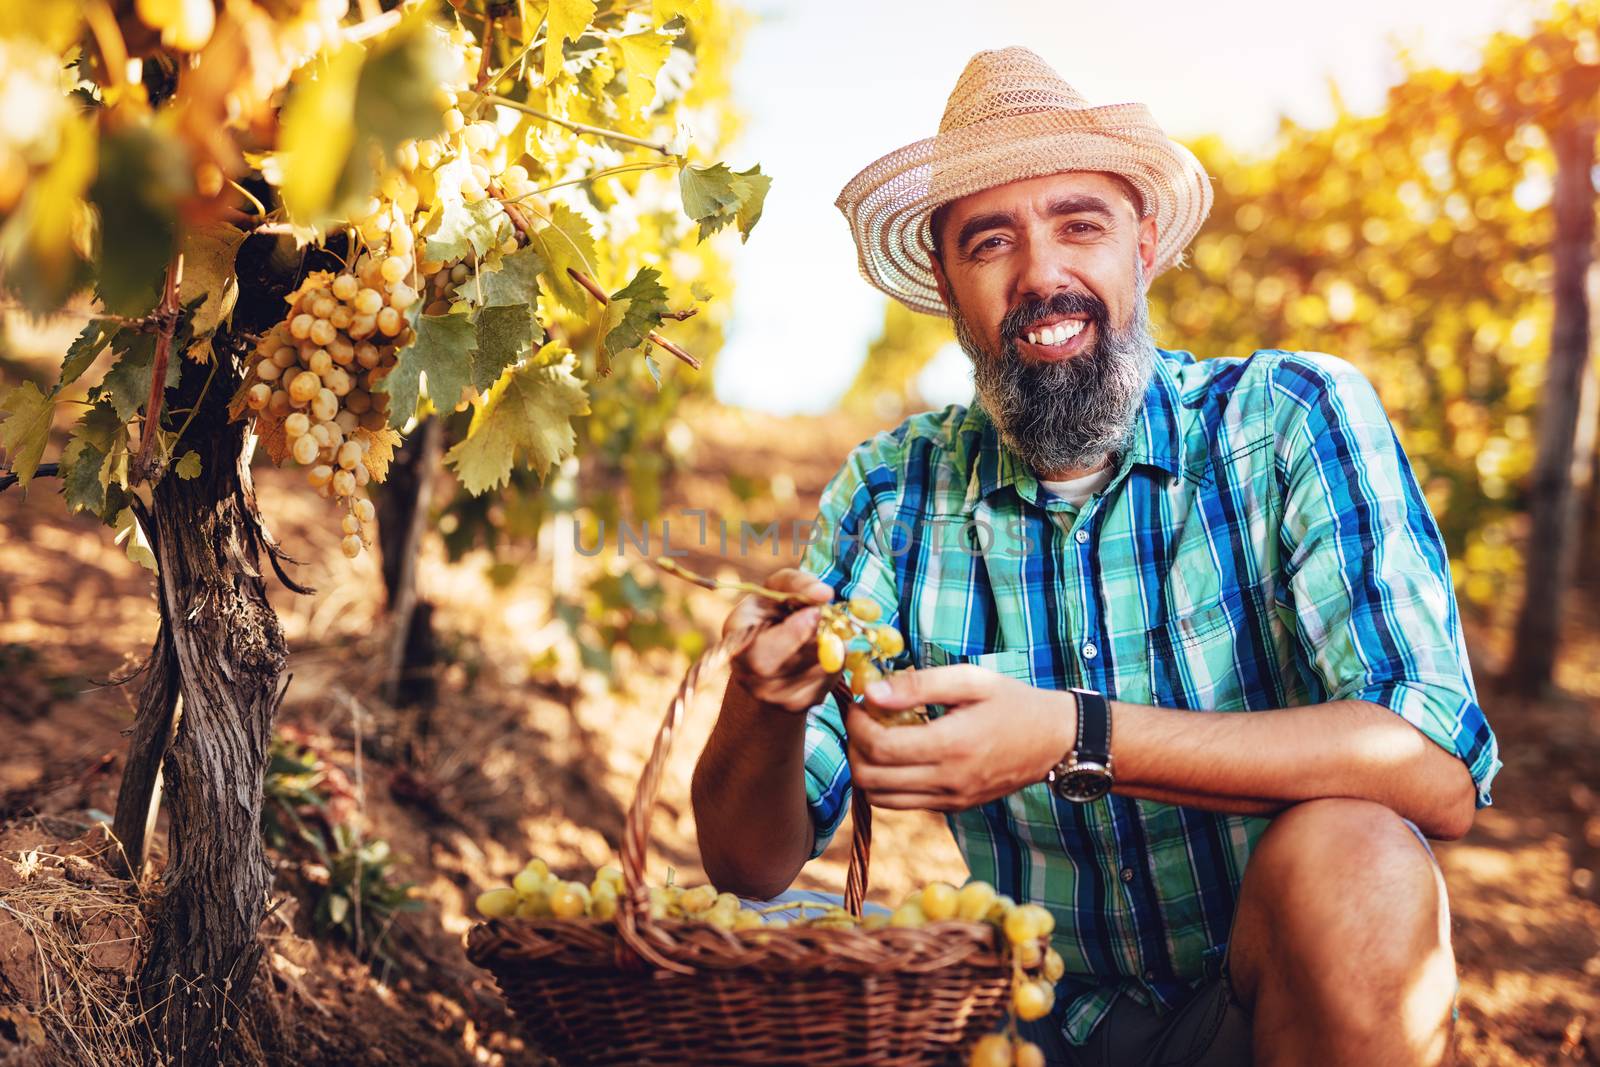 Handsome smiling wine maker with straw hat at a vineyard. Looking at camera.